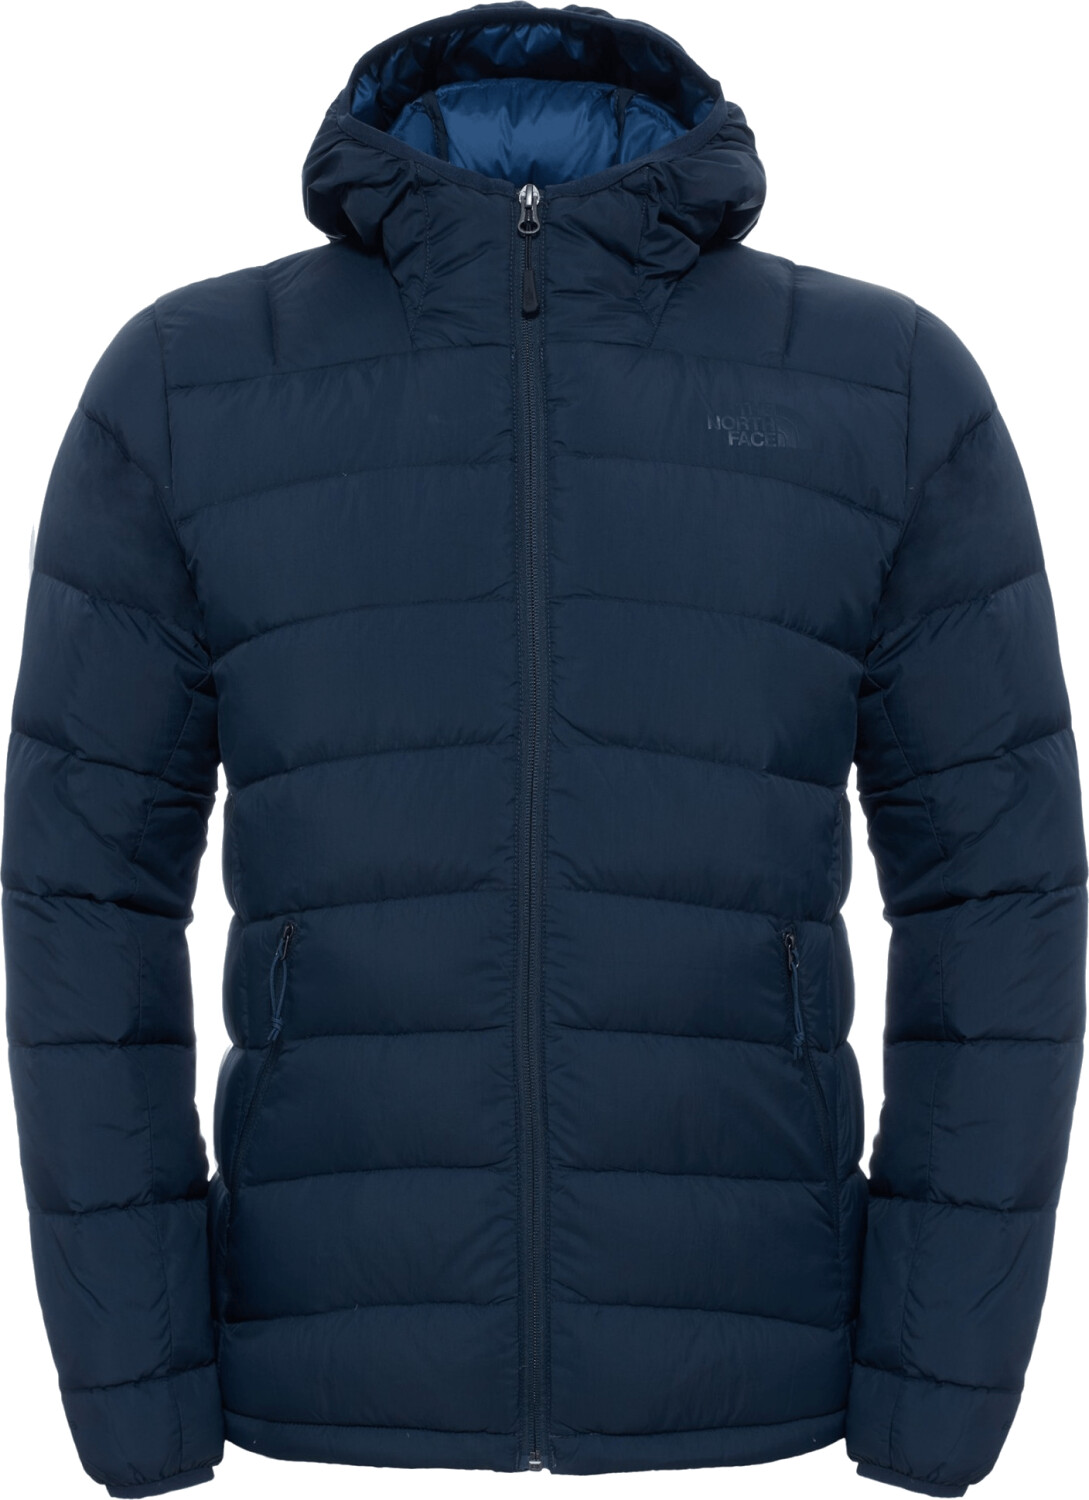 Buy The North Face Men's La Paz Hooded Jacket from £169.00 (Today ...